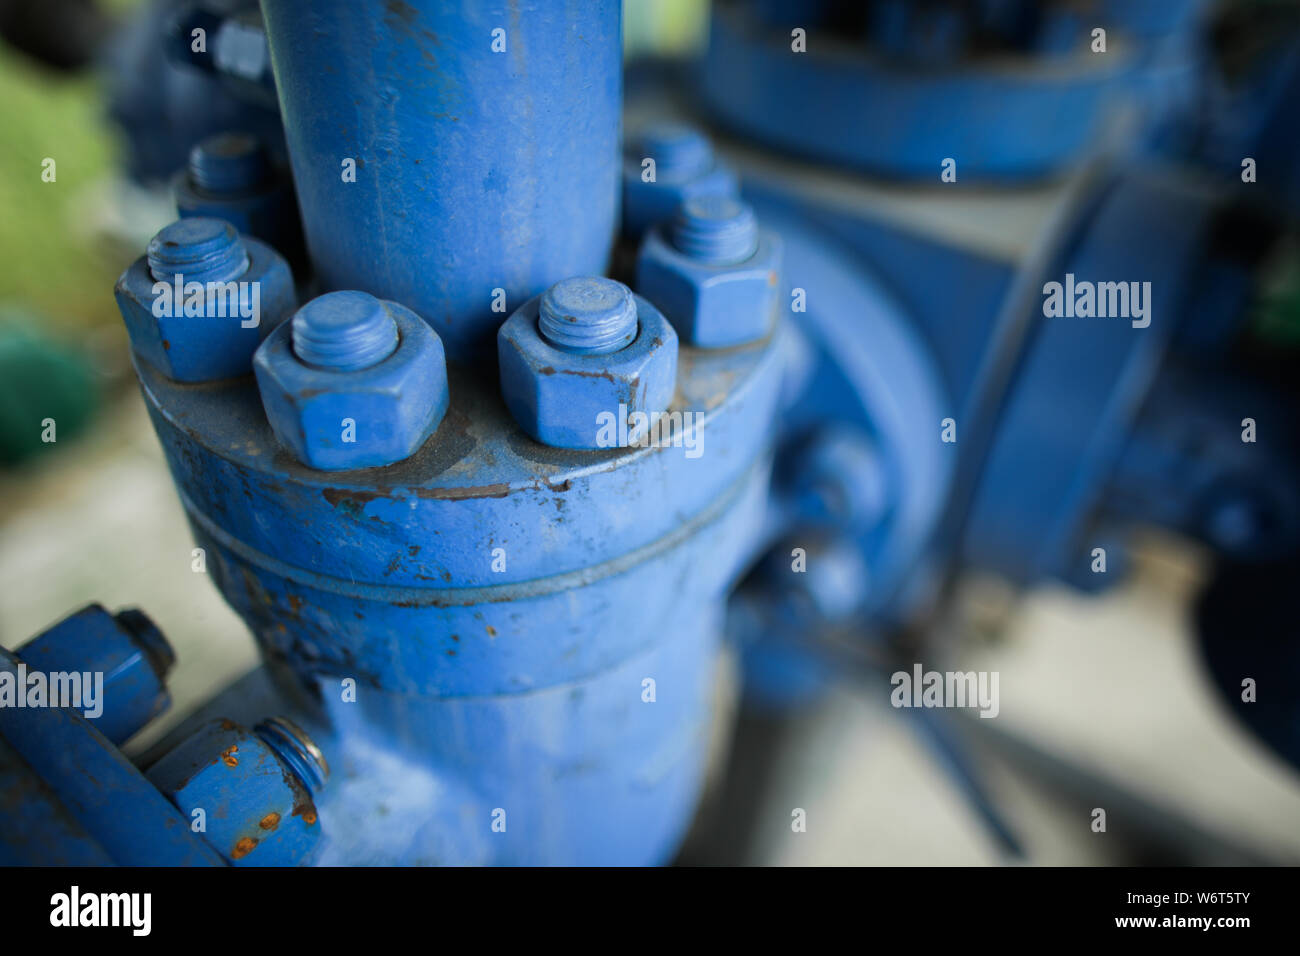 Shallow depth of field image with worn out heavy iron industrial equipment used in the oil and gas drilling industry (rusty bolts, nuts, pipes, levers Stock Photo